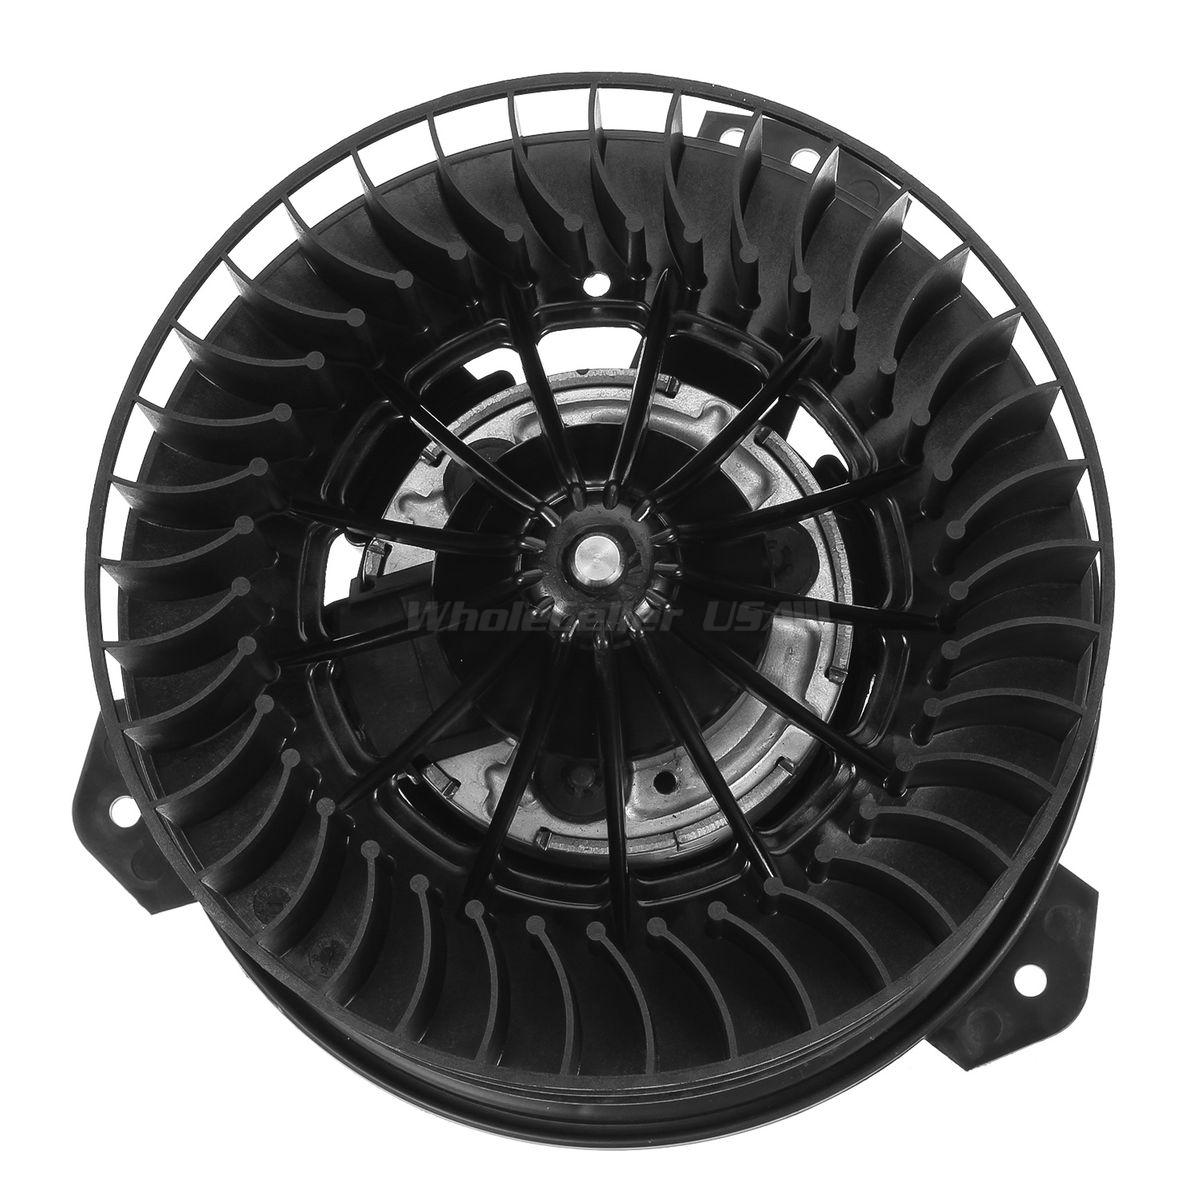 4885475AC Heater Blower Motor Fan Cage For Chrysler Town & Country 2001-2007 | eBay 2007 Chrysler Town And Country Radiator Fan Not Working